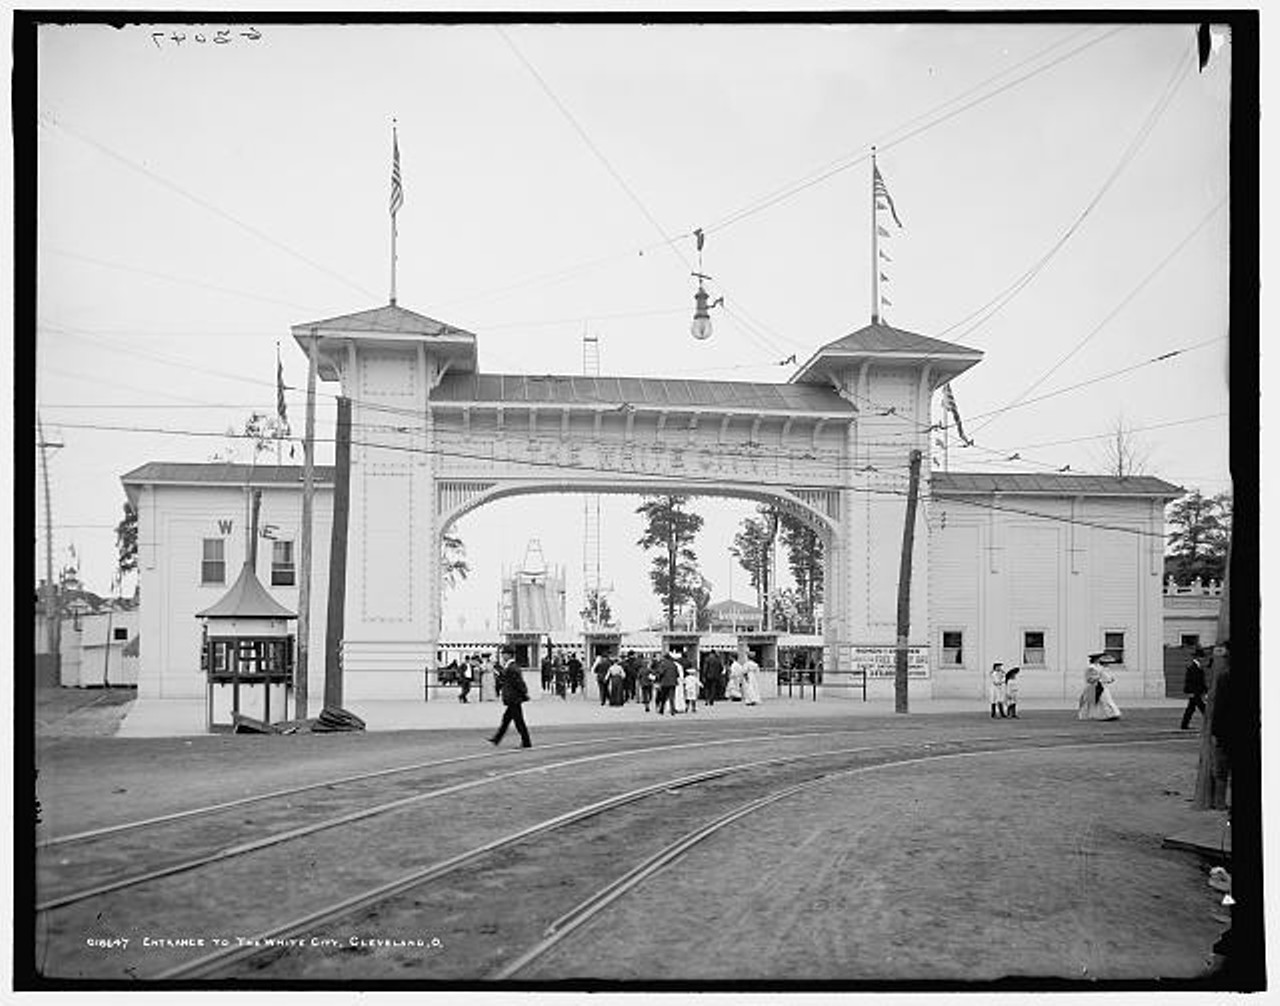 Entrance to White City, between 1900 and 1906.